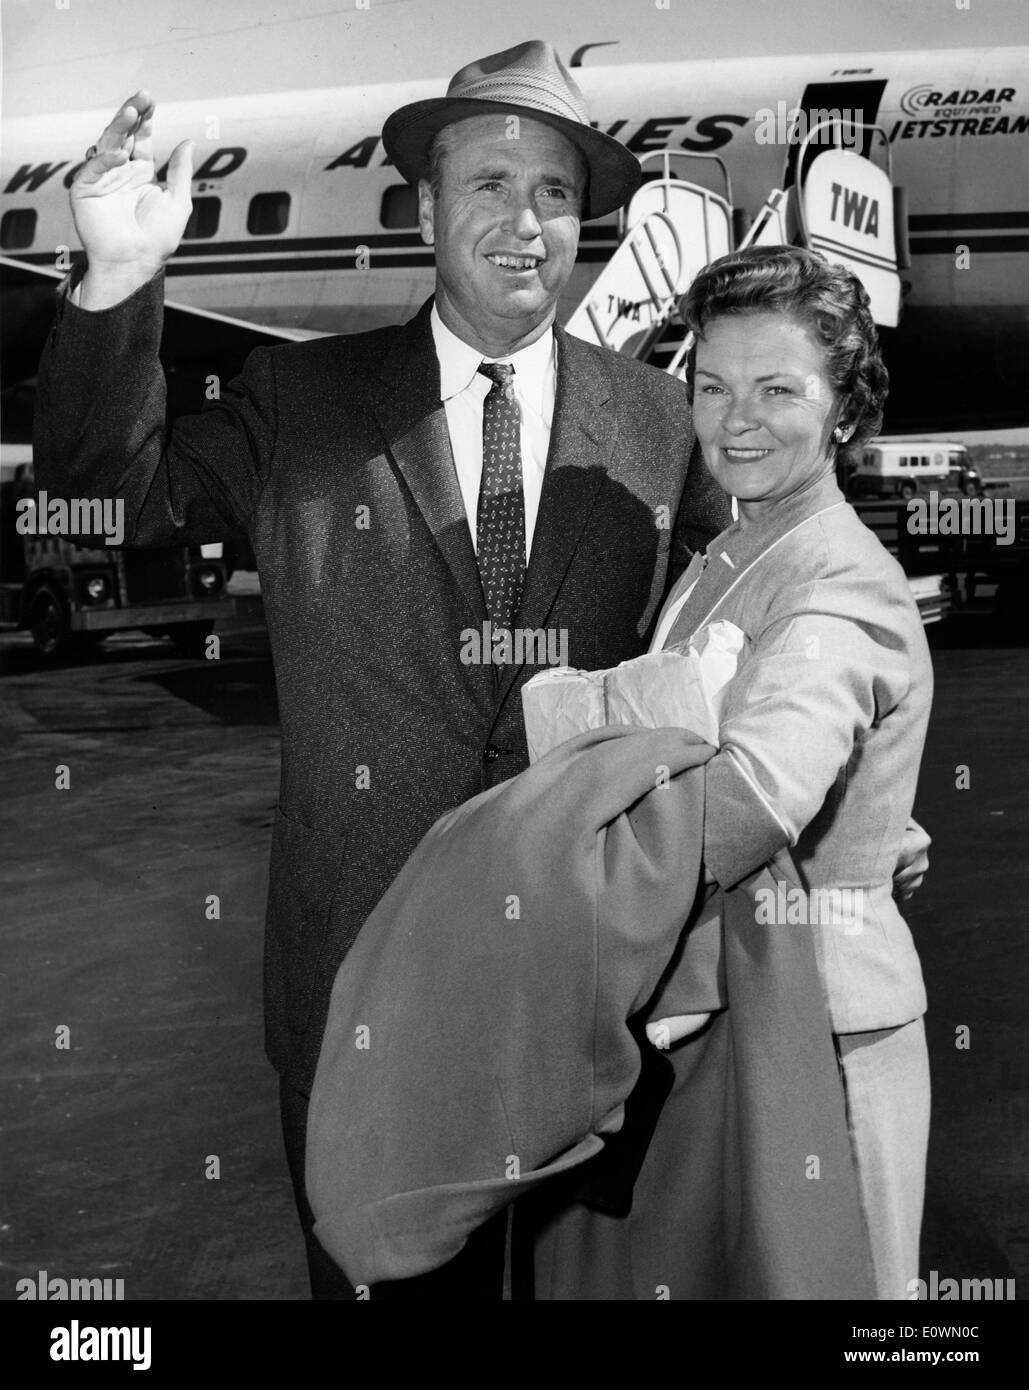 Baseball manager Walter Alston and his wife at the airport Stock Photo